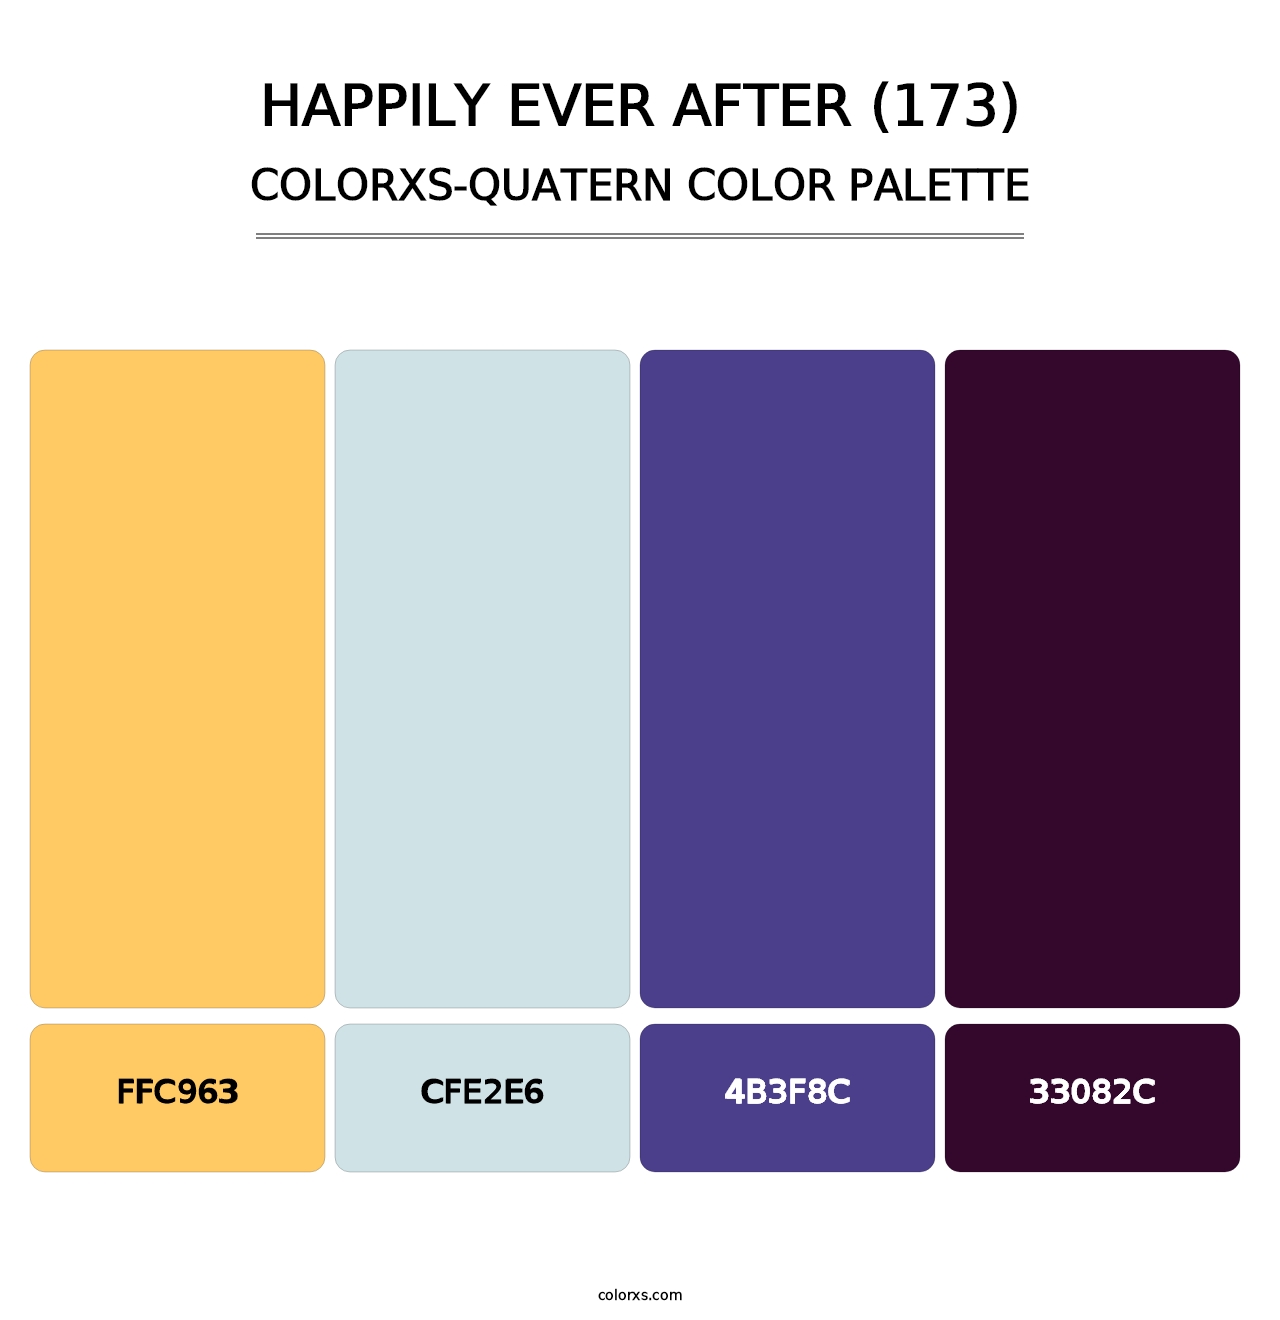 Happily Ever After (173) - Colorxs Quatern Palette